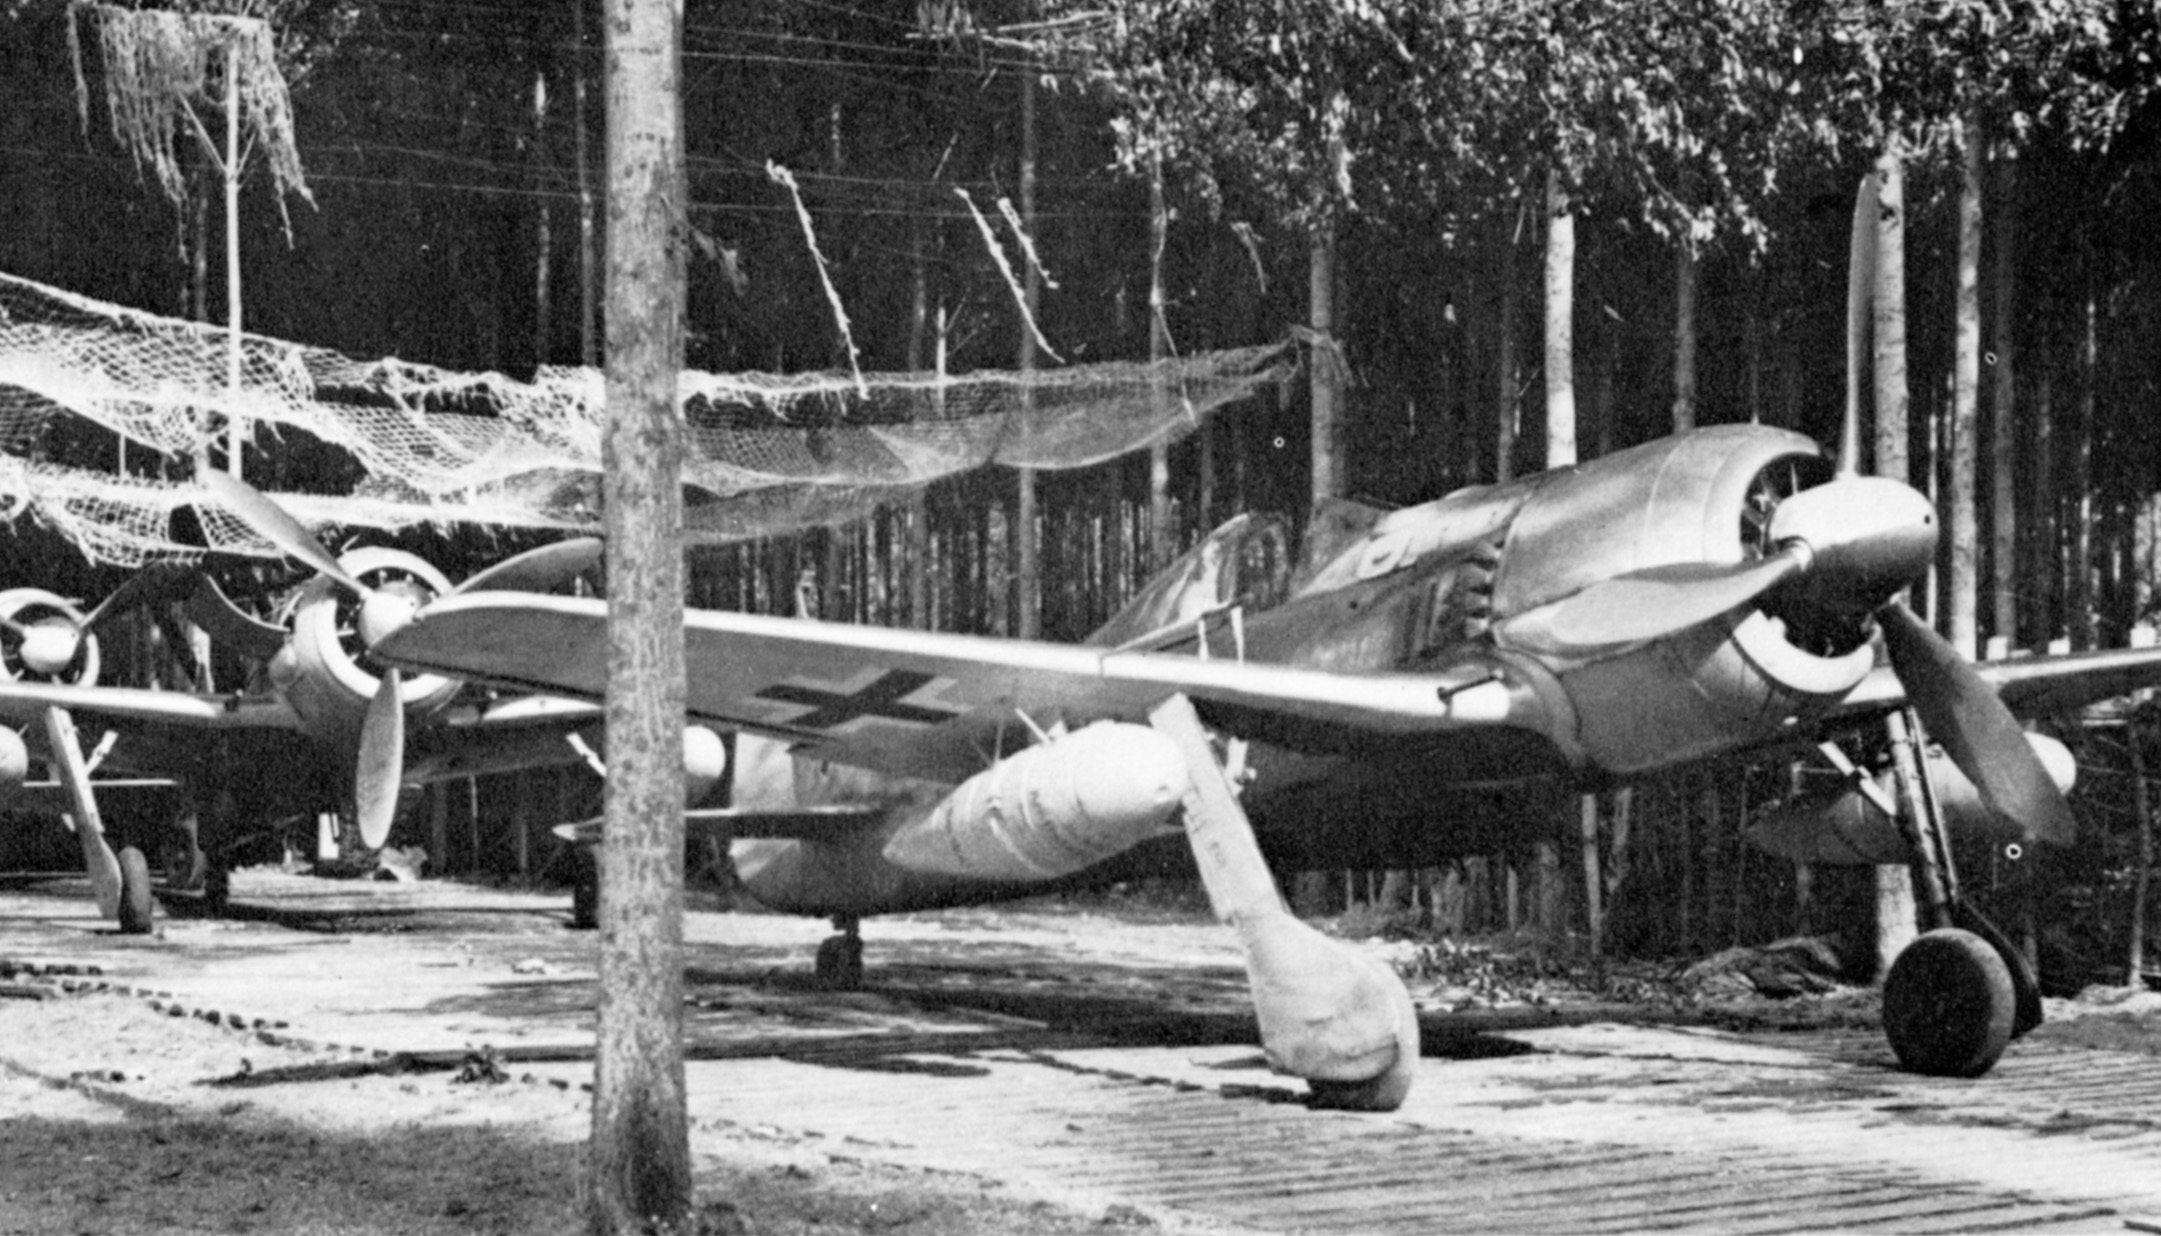 Hoping to avoid the eyes of Allied fighter-bombers, German fighters sit under the cover of trees and camouflage netting. 